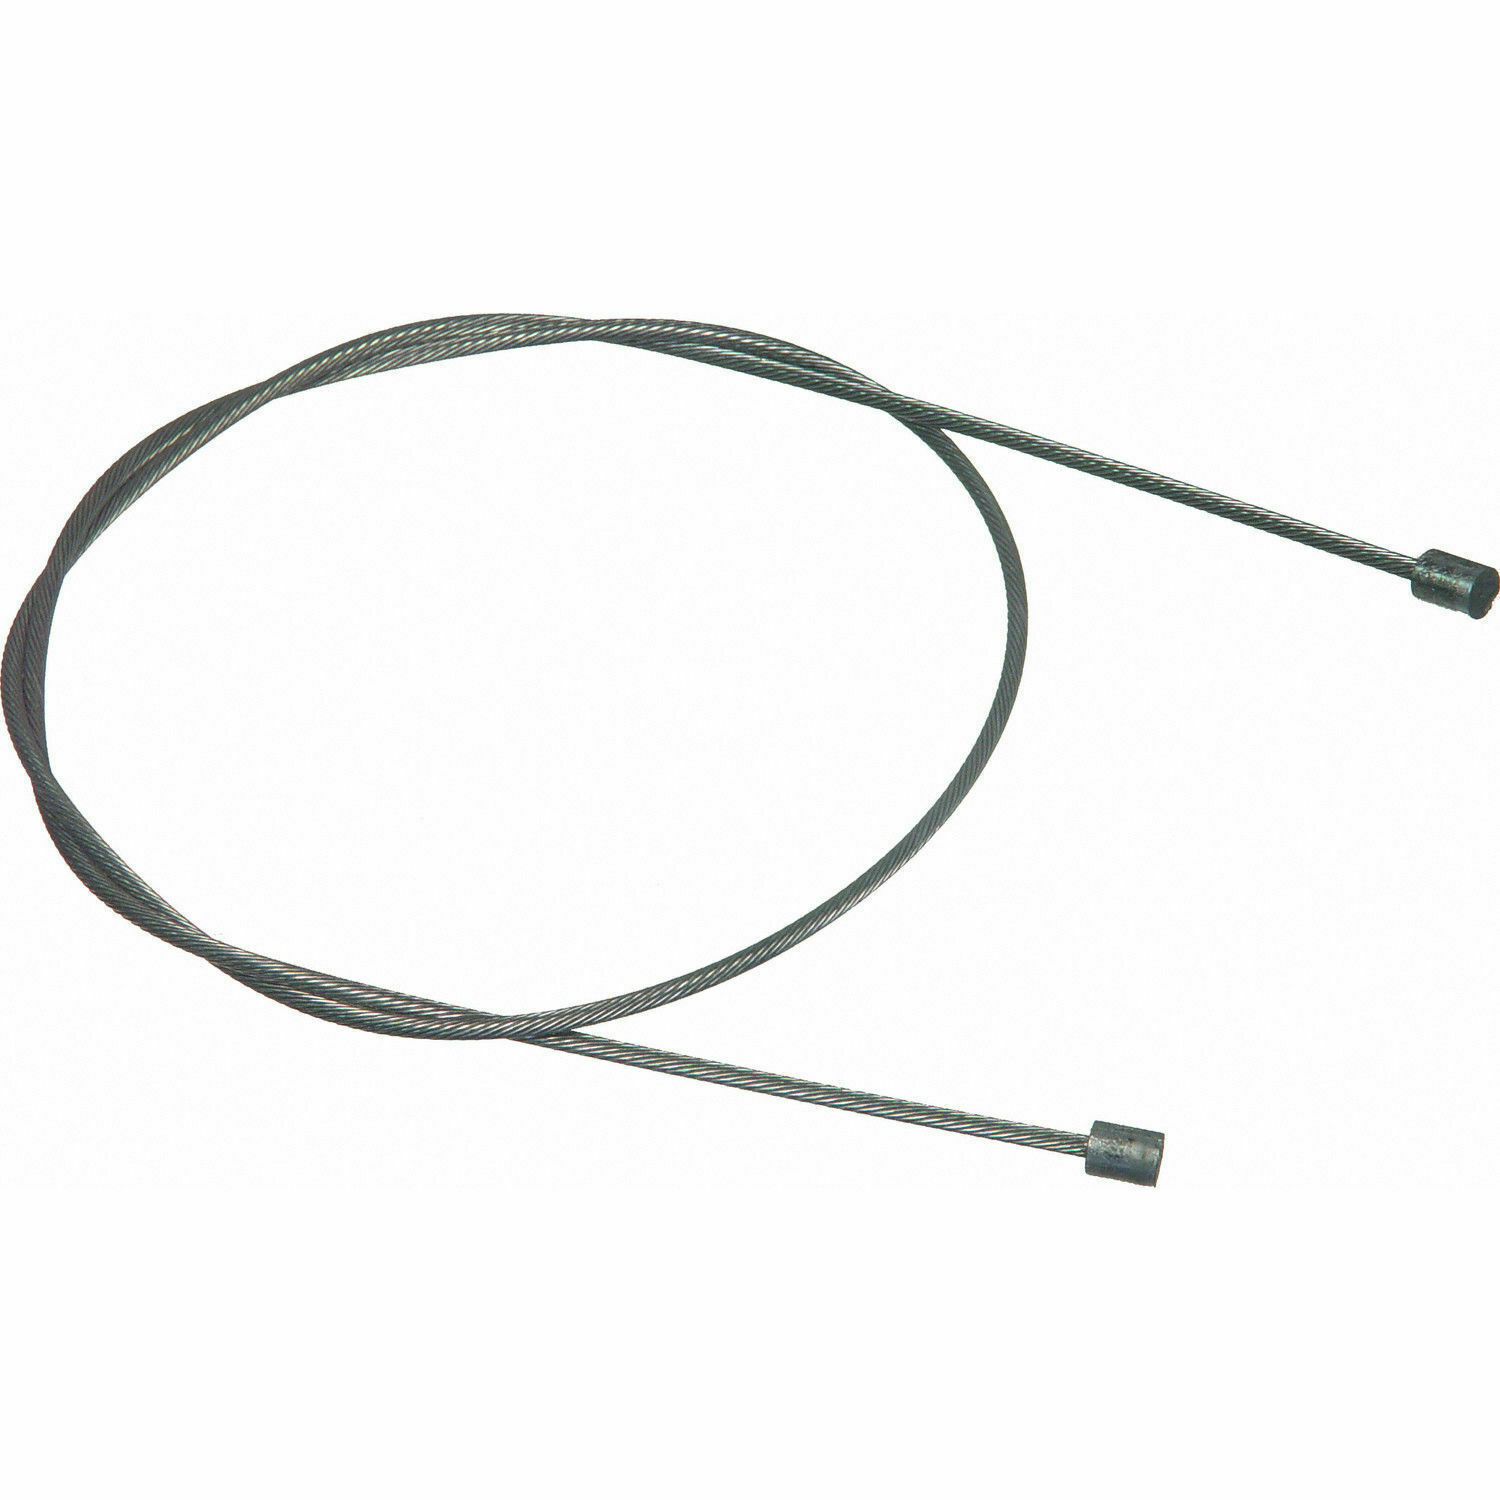 Wagner BC133080 F133080 Parking Brake Cable Fits 1995-1997 Ford Explorer - $24.23